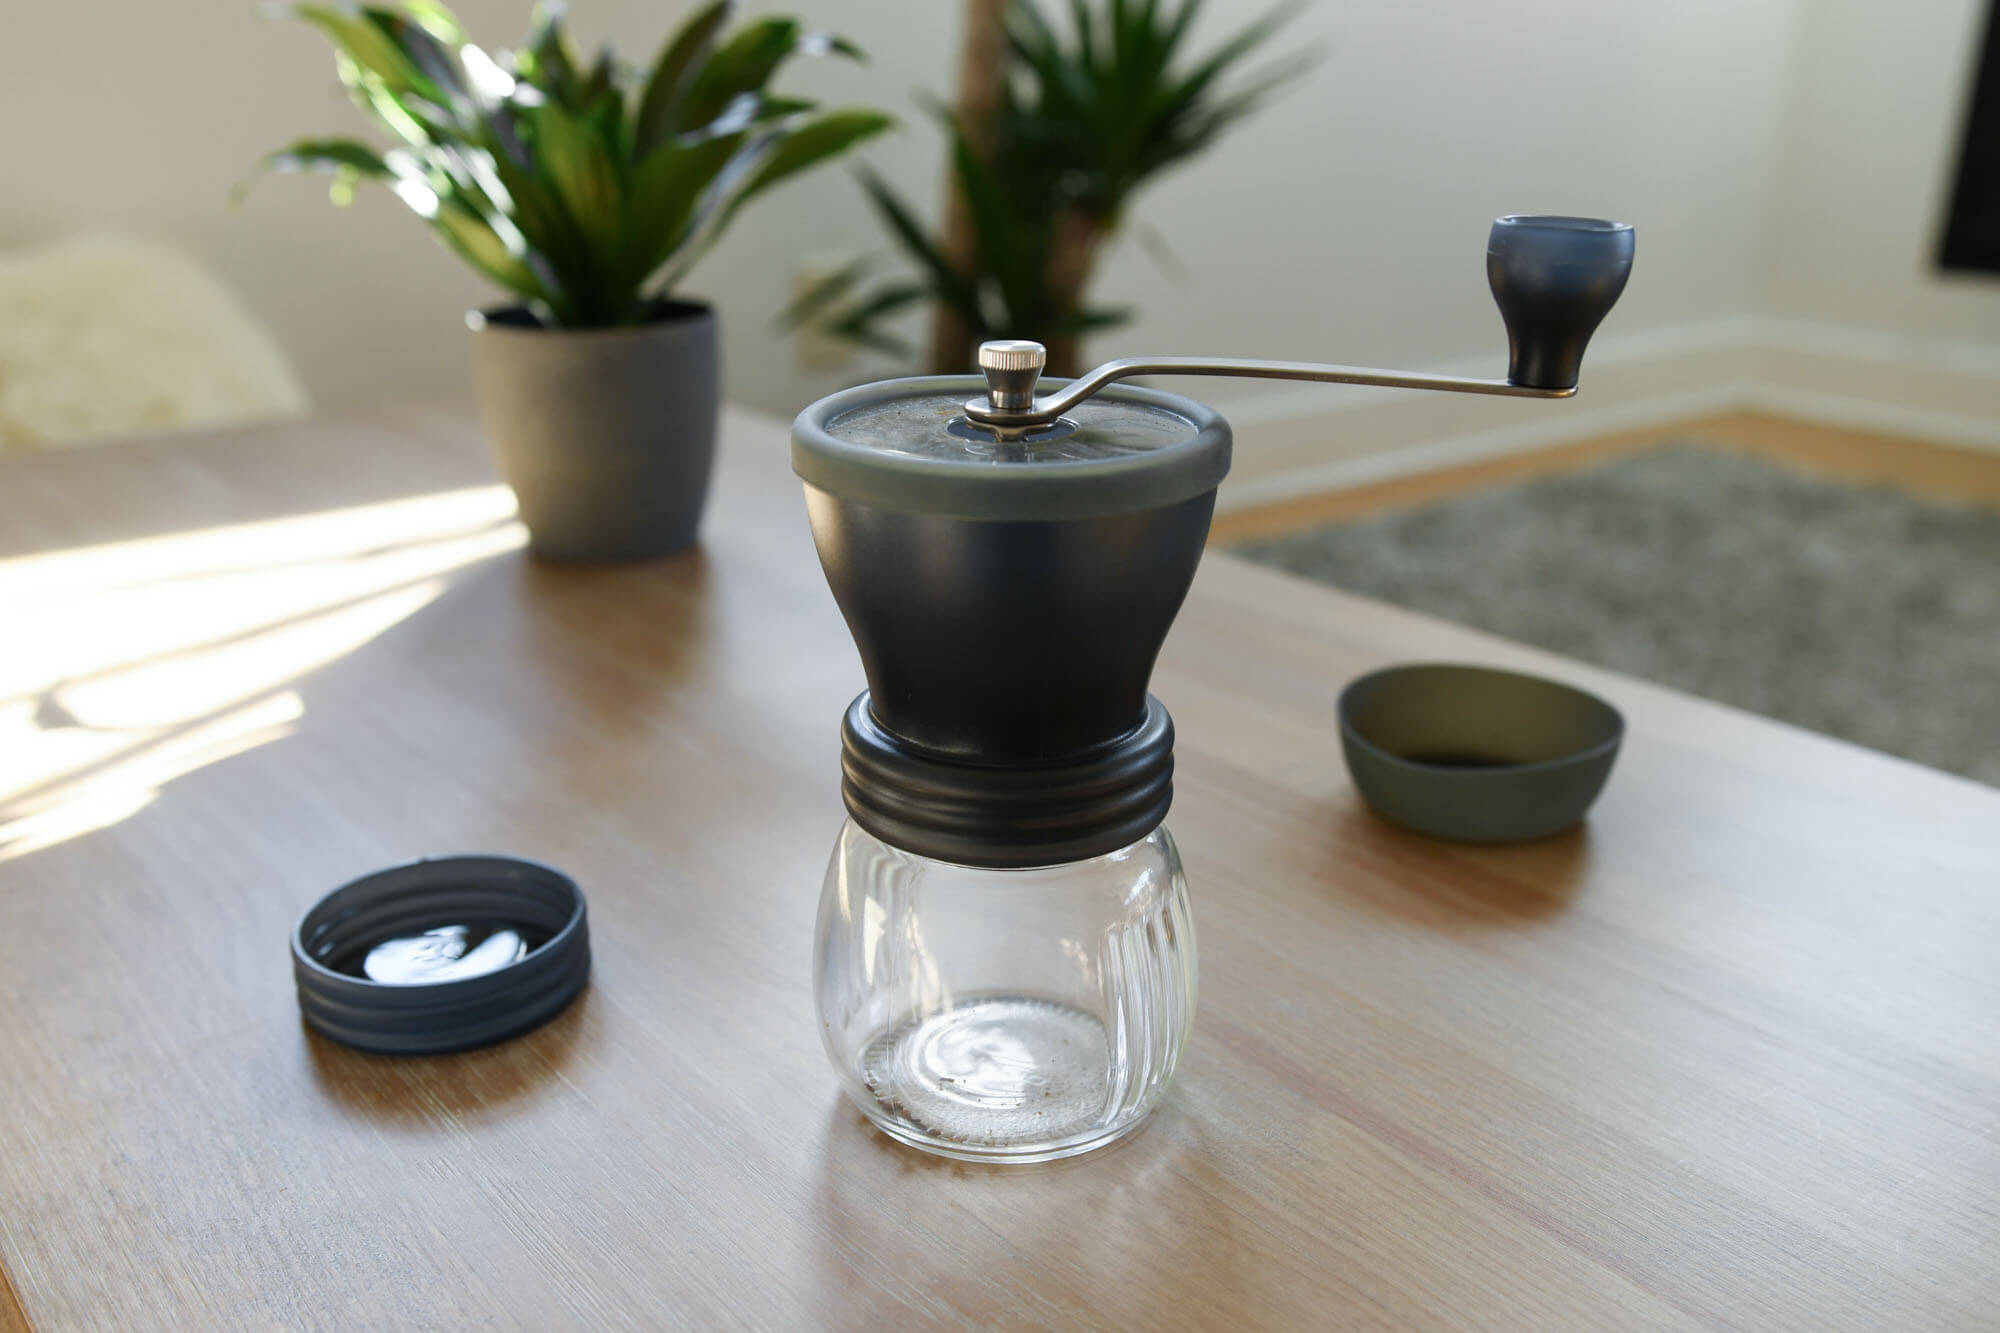 Hario Skerton Coffee Grinder Review: a Durable and Consistent Manual Burr  Grinder